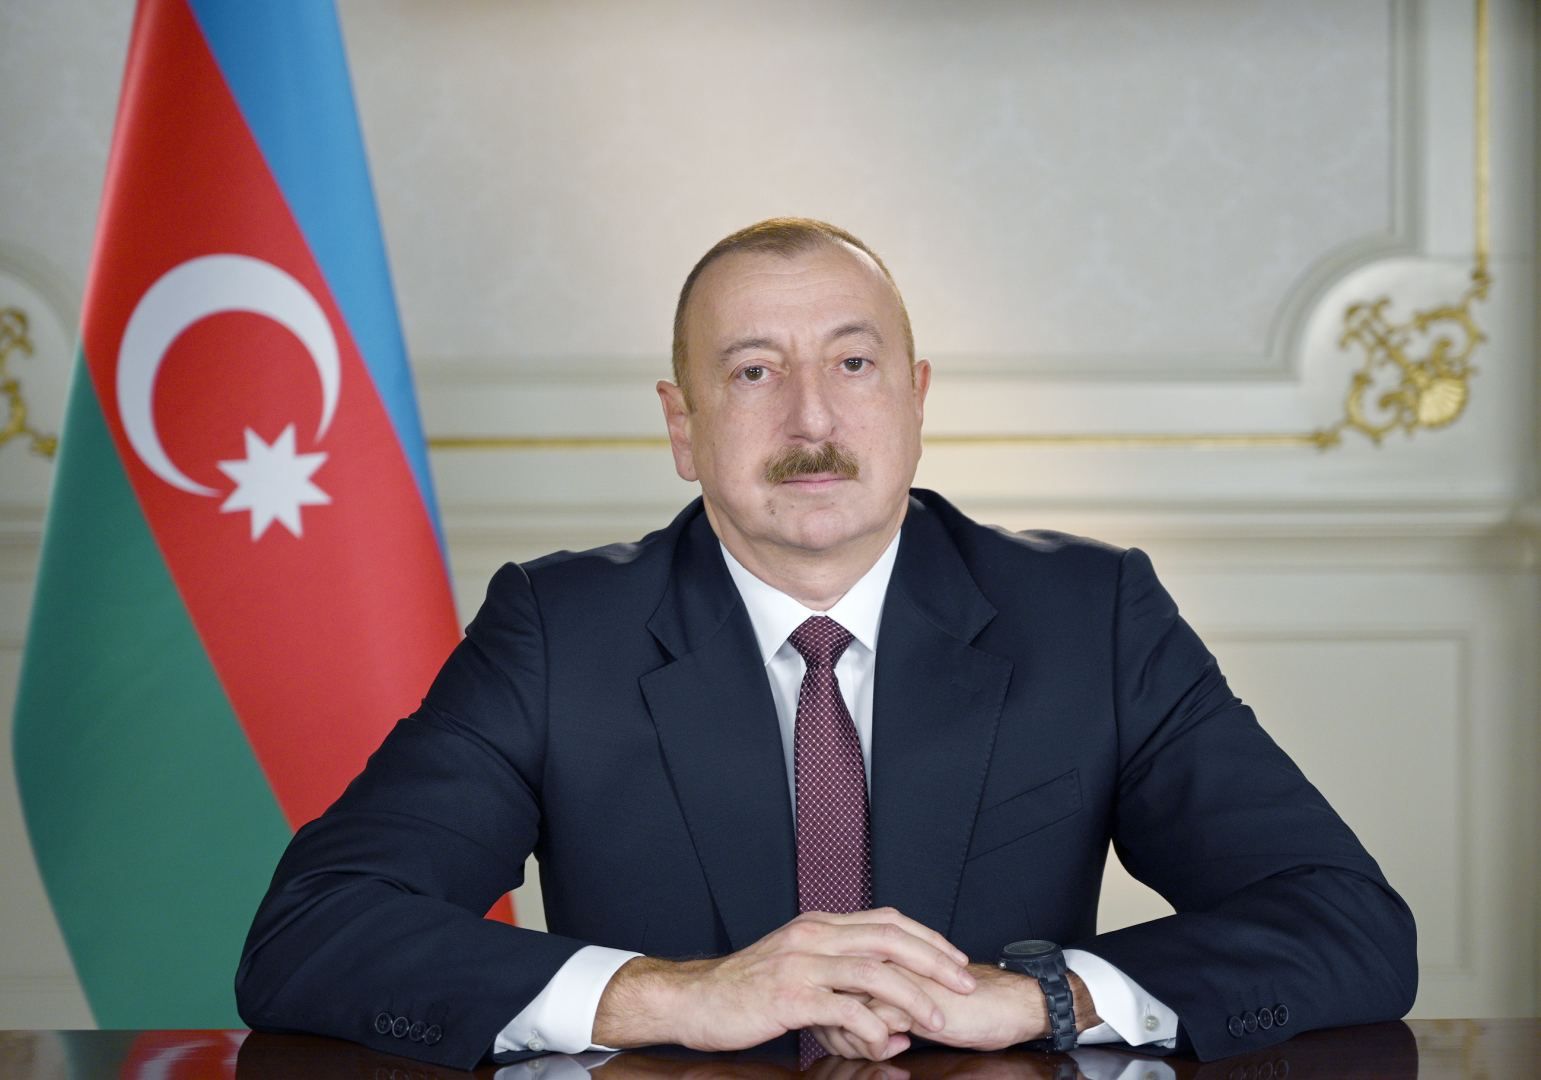 President Ilham Aliyev awards highest ranks to employees of Azerbaijan's Ministry of Emergency Situations